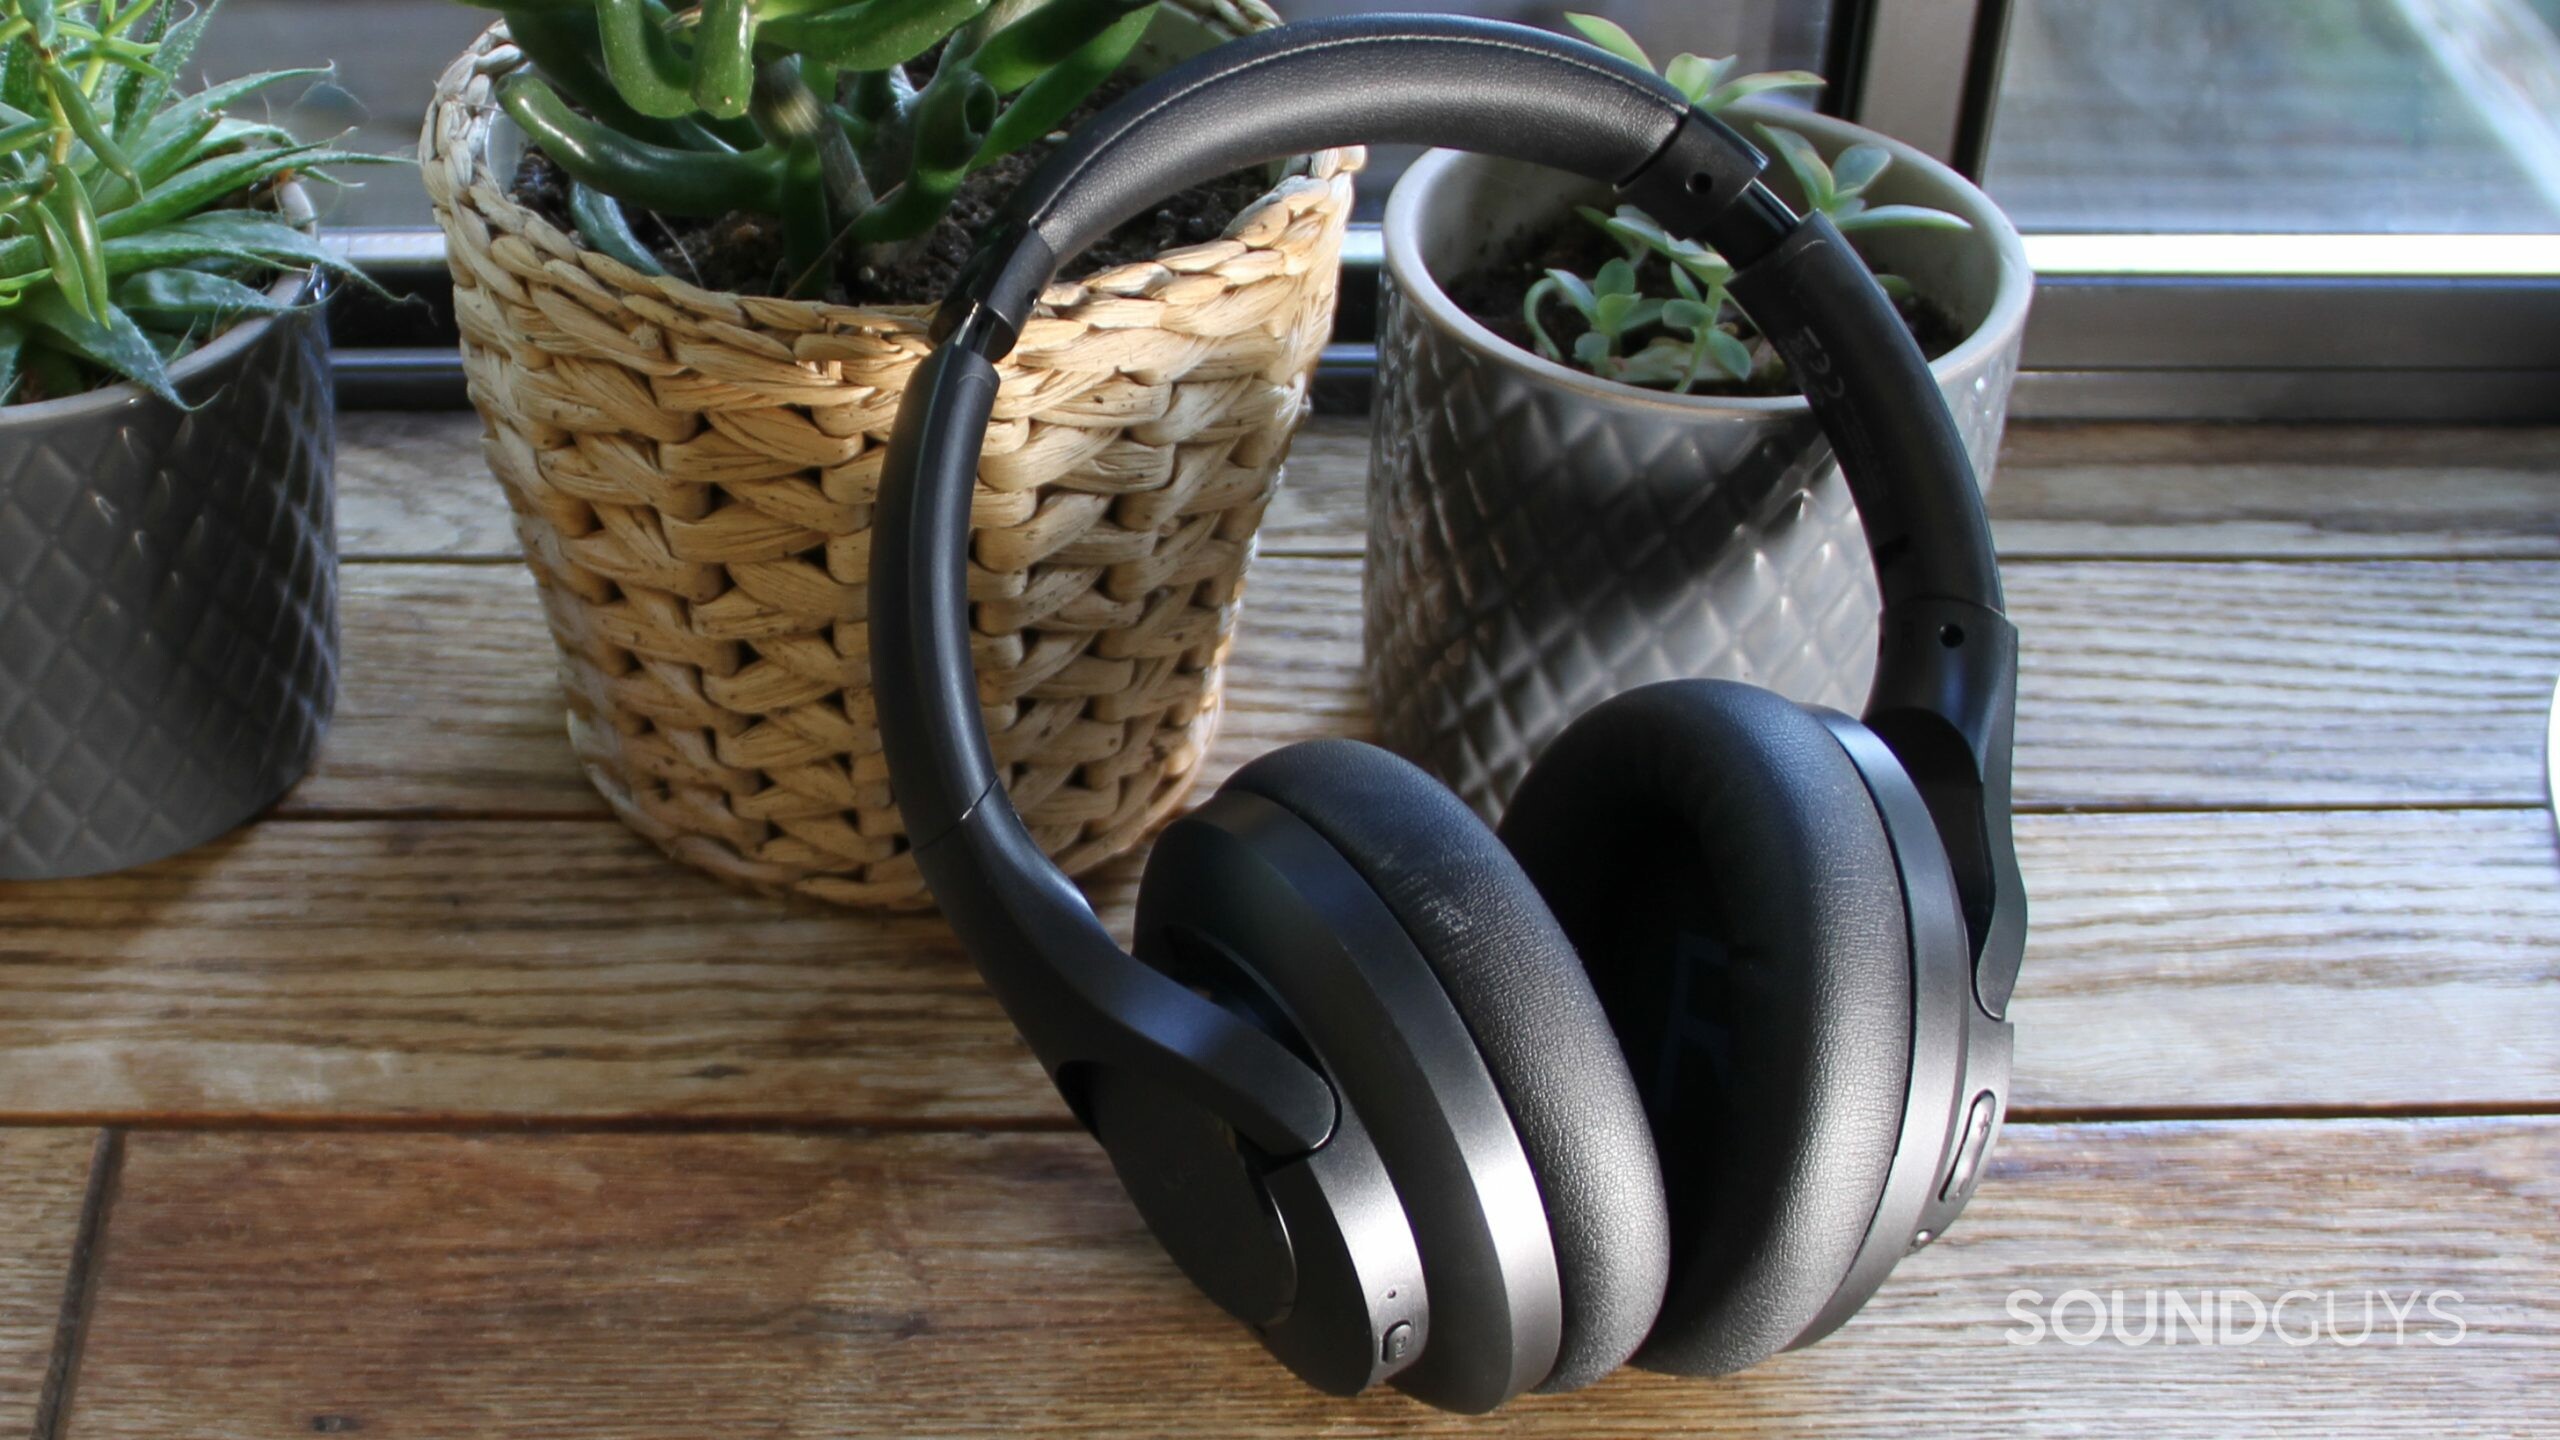 Aukey Hybrid Active Noise Canceling Headphones leans against a grey potted plant and a wicker plant pot all sitting on a wood surface and a window in the background.